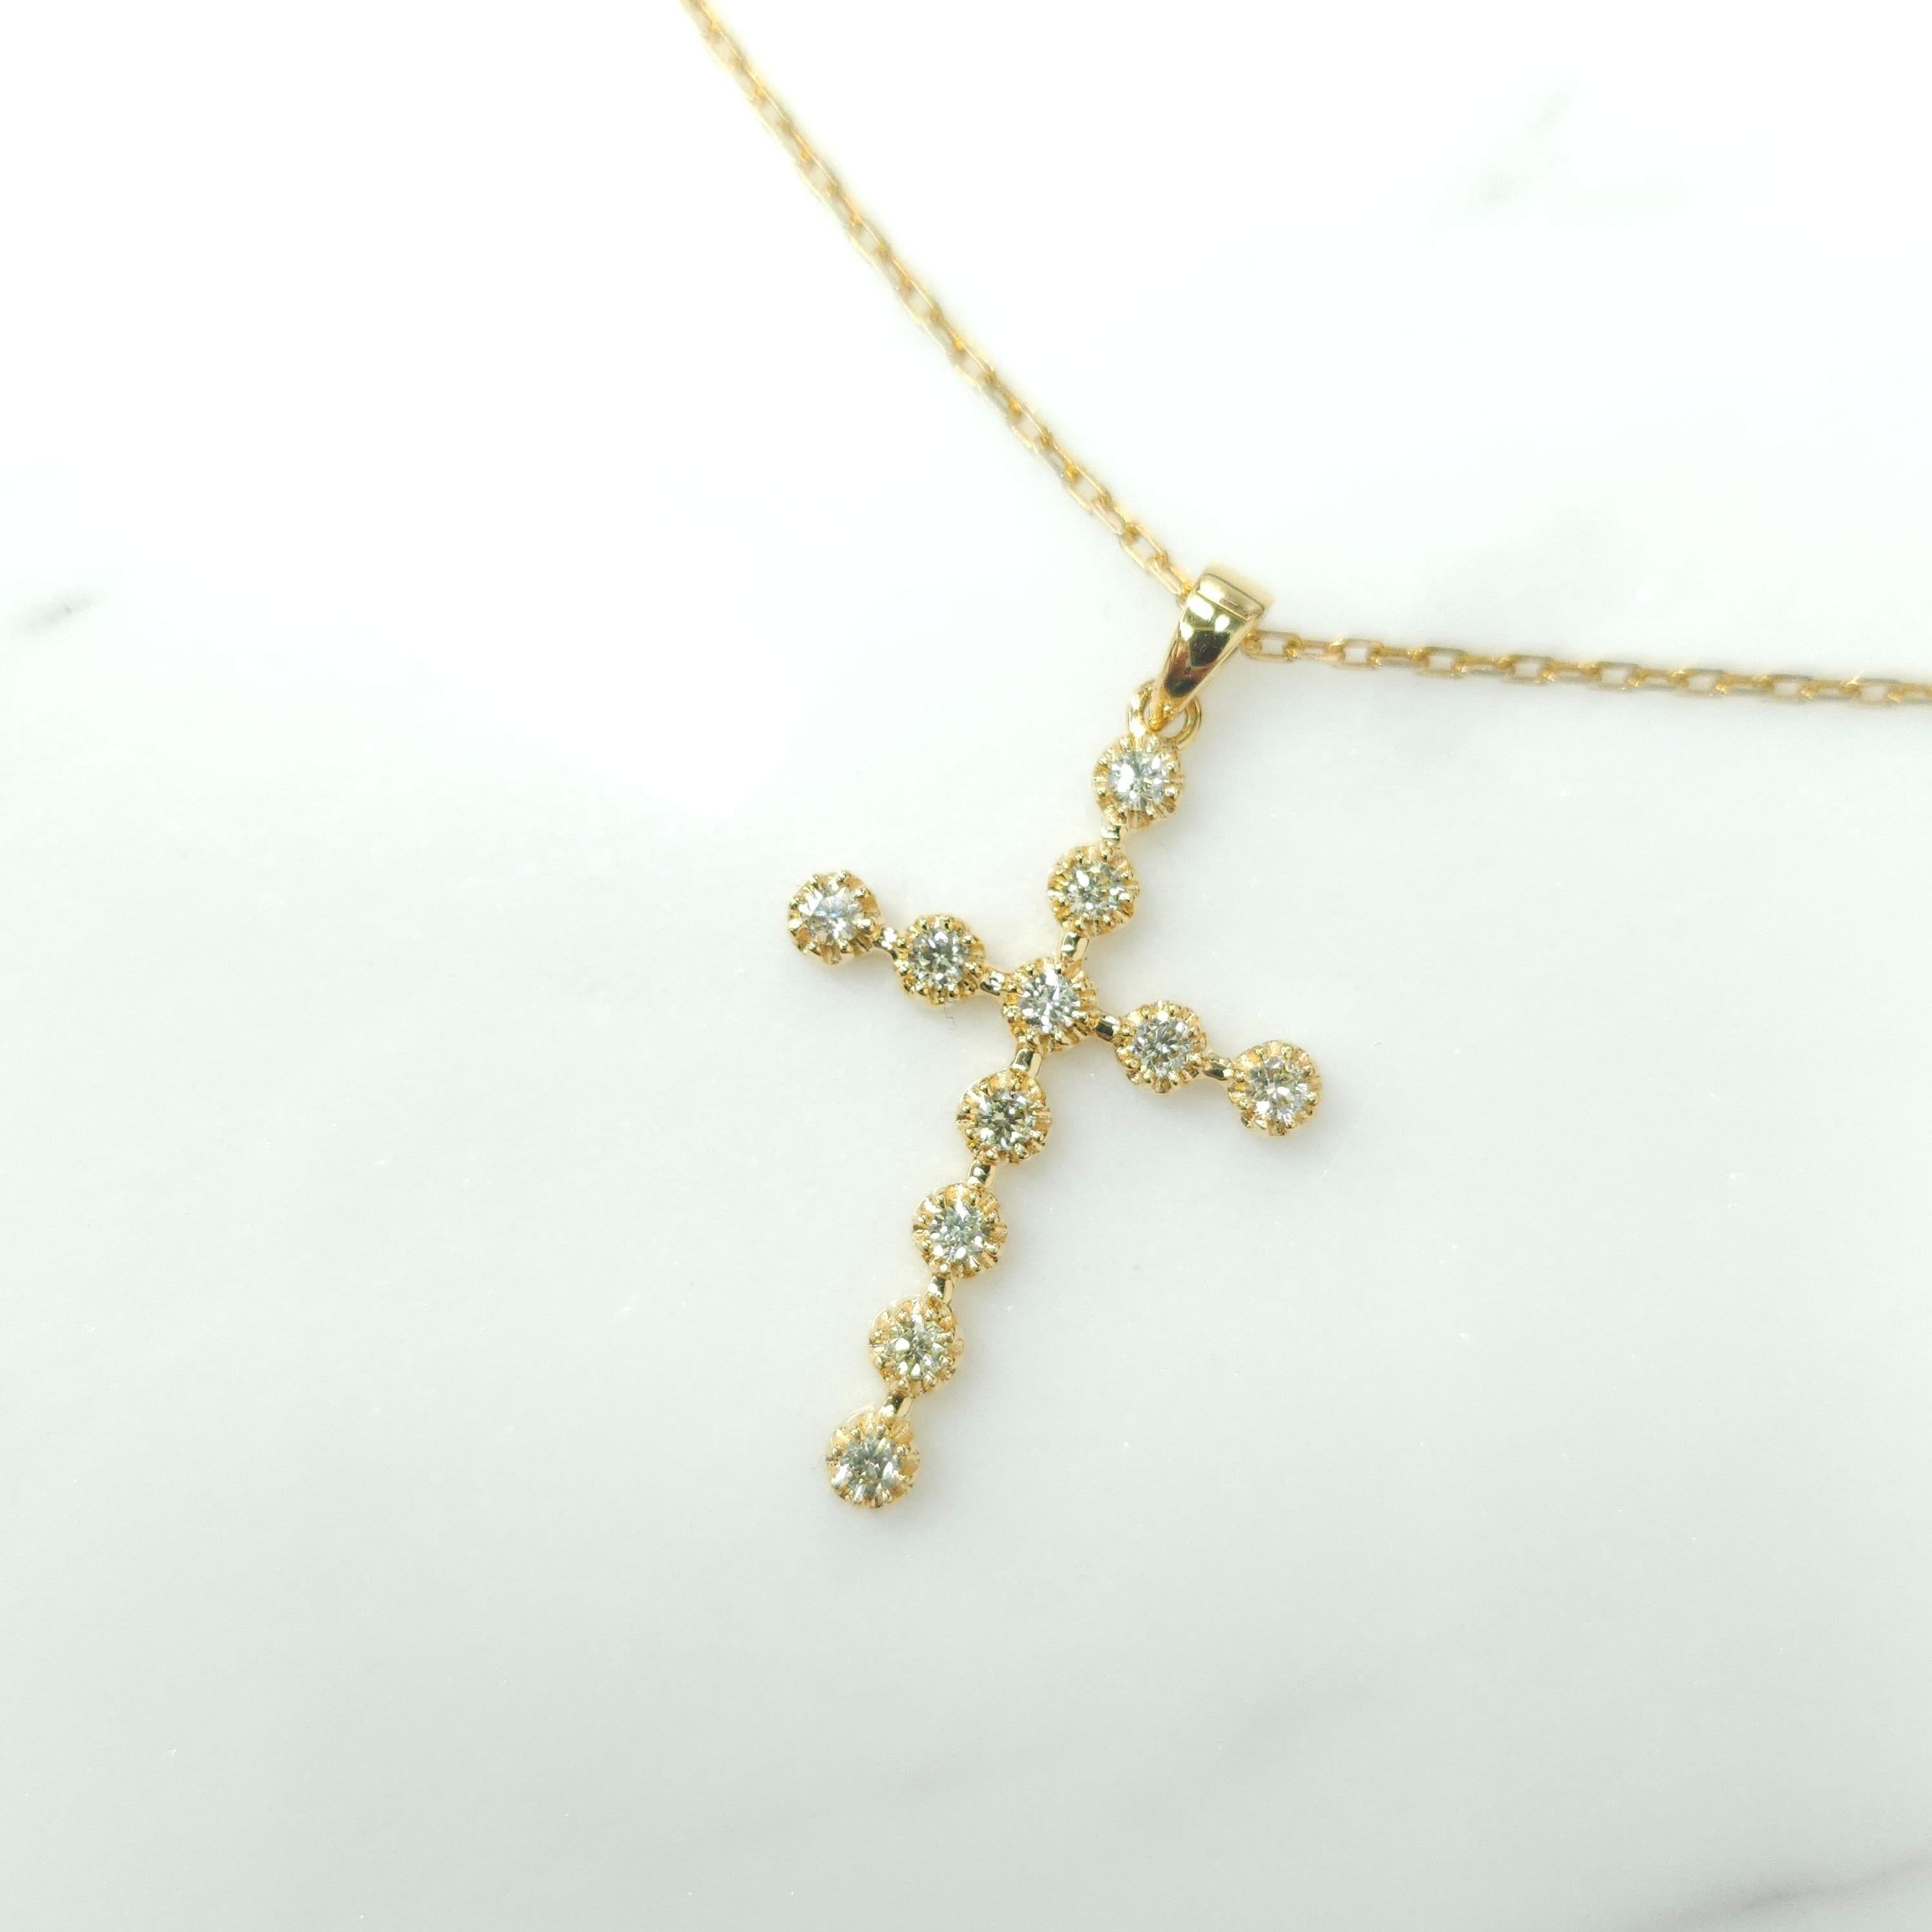 A precious interpretation of a classic motif, this exquisite Diamond Cross Pendant is handcrafted from 18 karat gold and glistens with diamonds.
This pendant is a 0.28 total carats of natural diamonds. (Necklace not included).

The cross with the